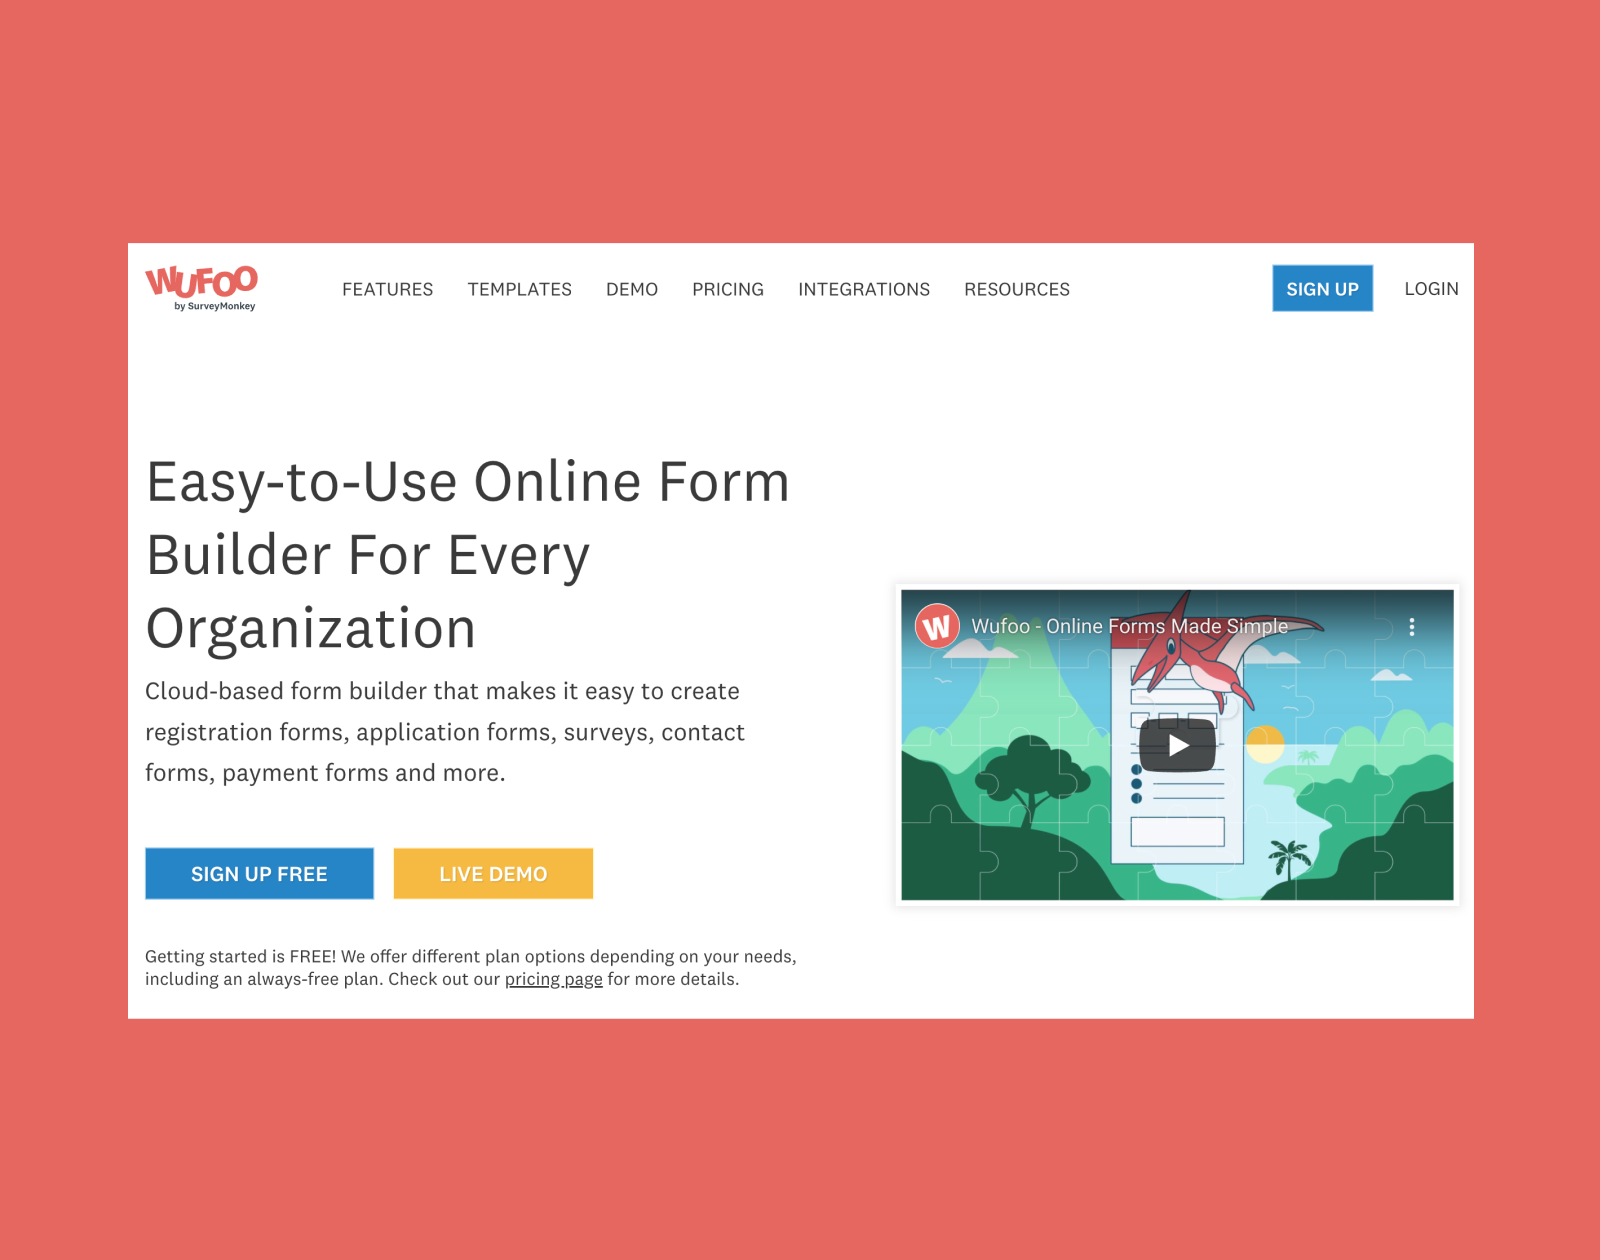 WuFoo helps to build amazing online forms